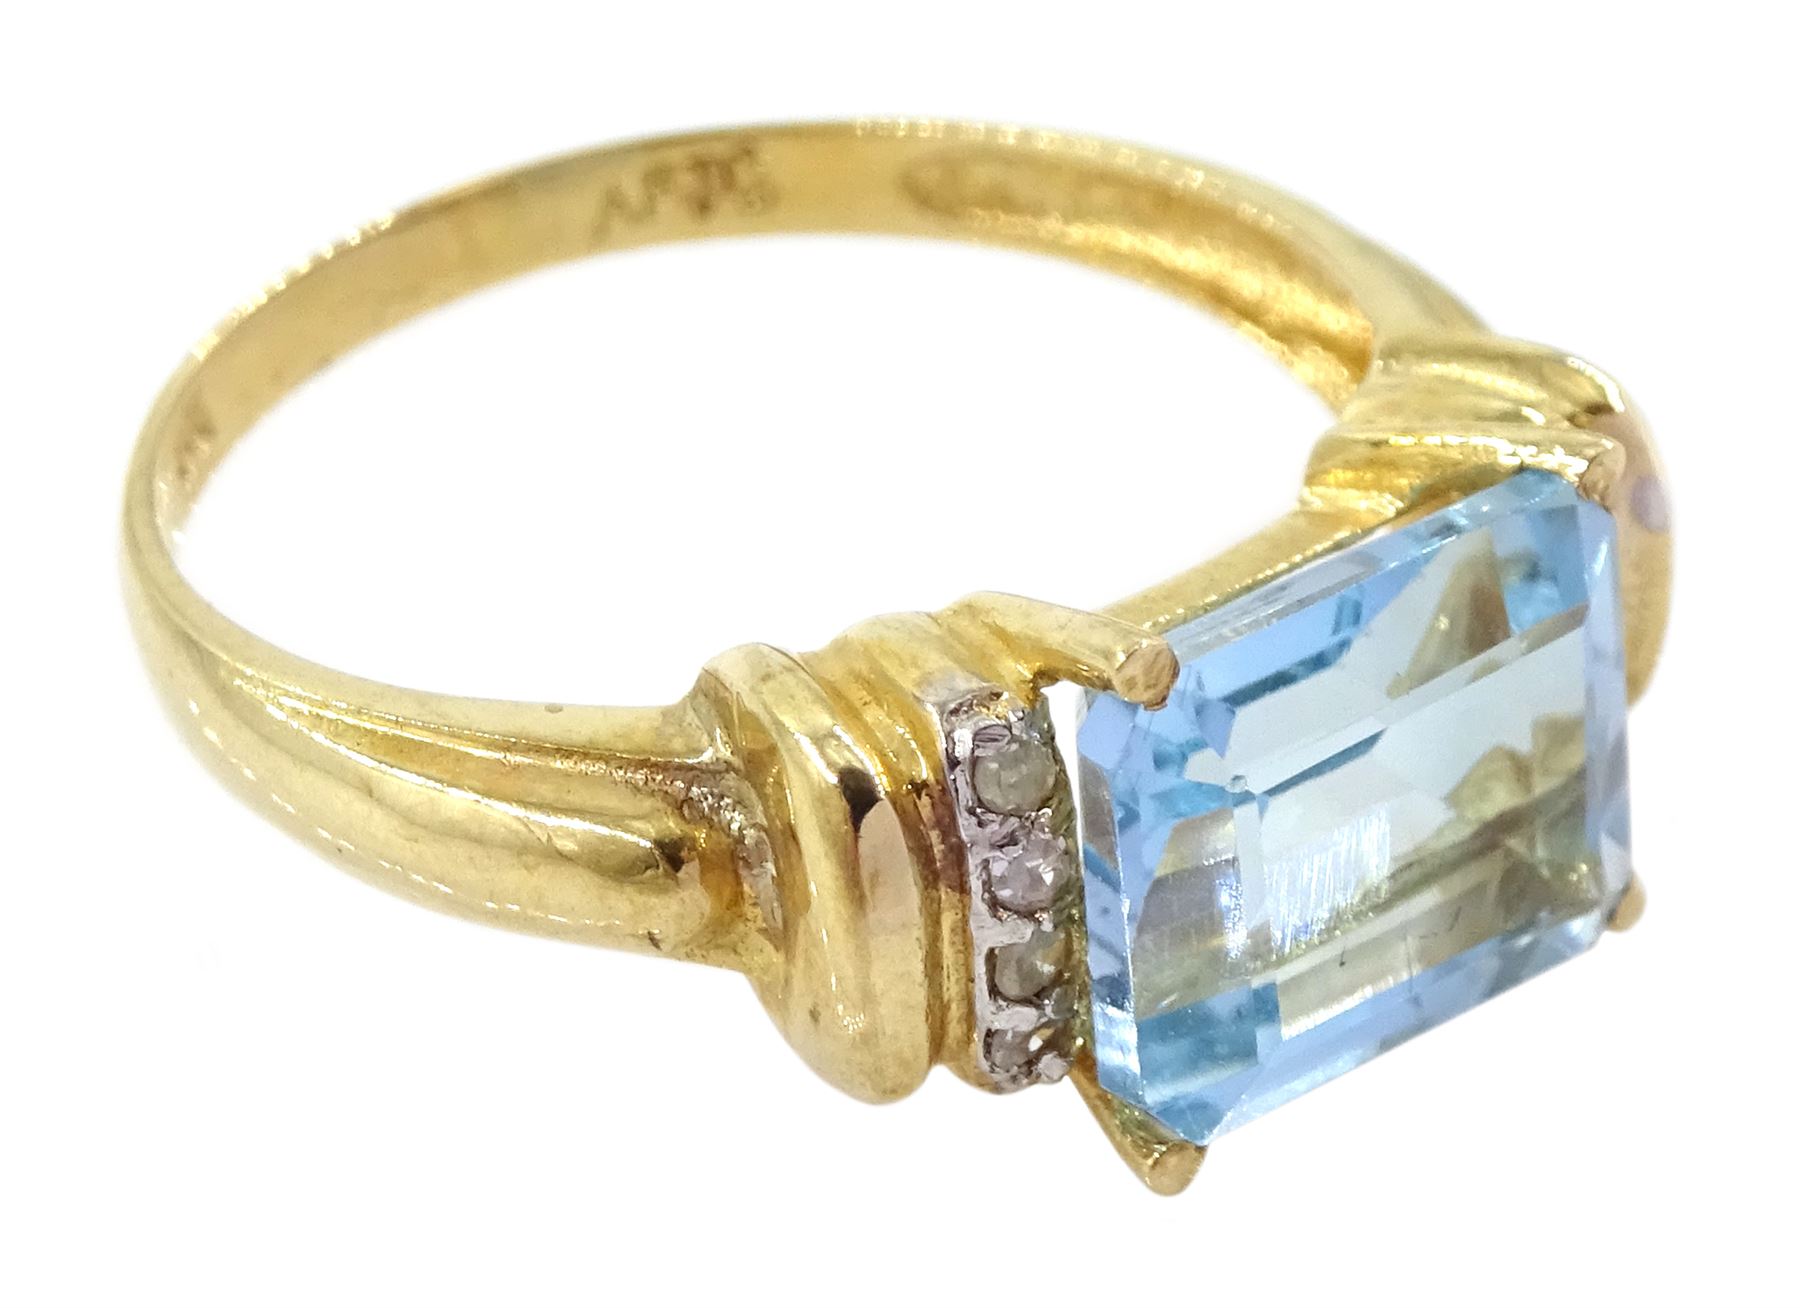 Gold emerald cut blue topaz and diamond ring - Image 3 of 4